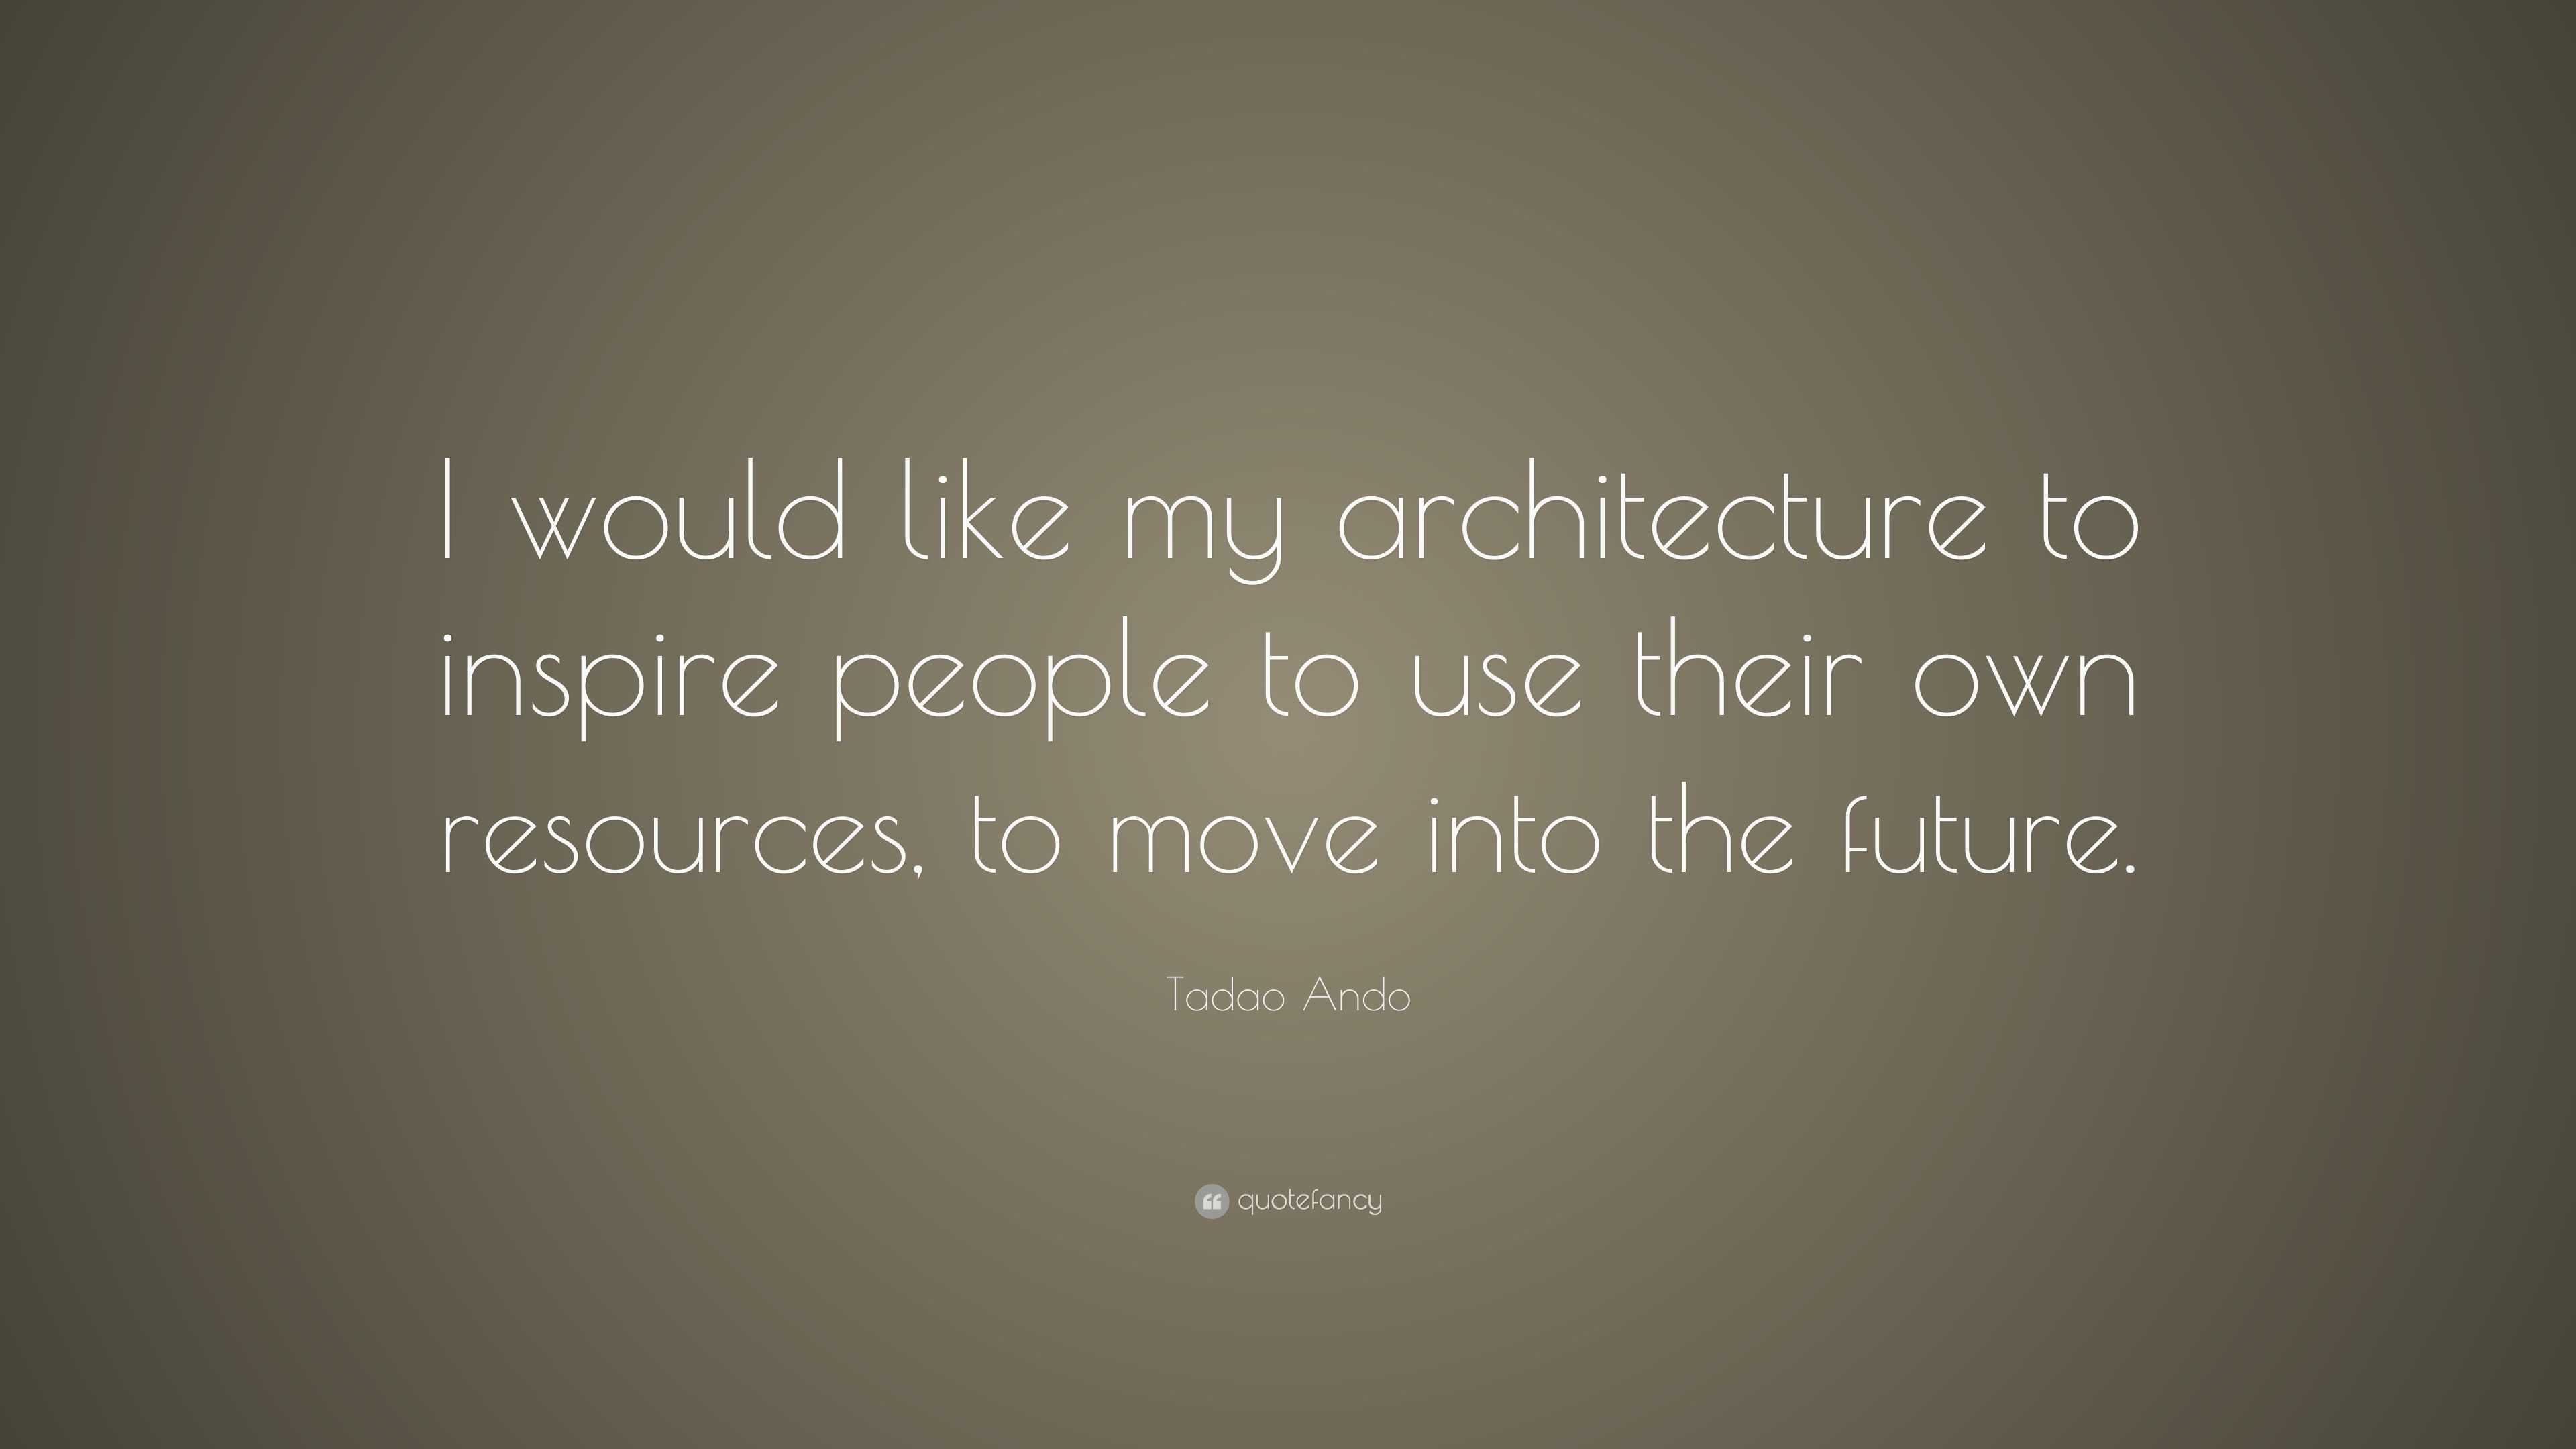 Tadao Ando Quote: “I would like my architecture to inspire people to ...